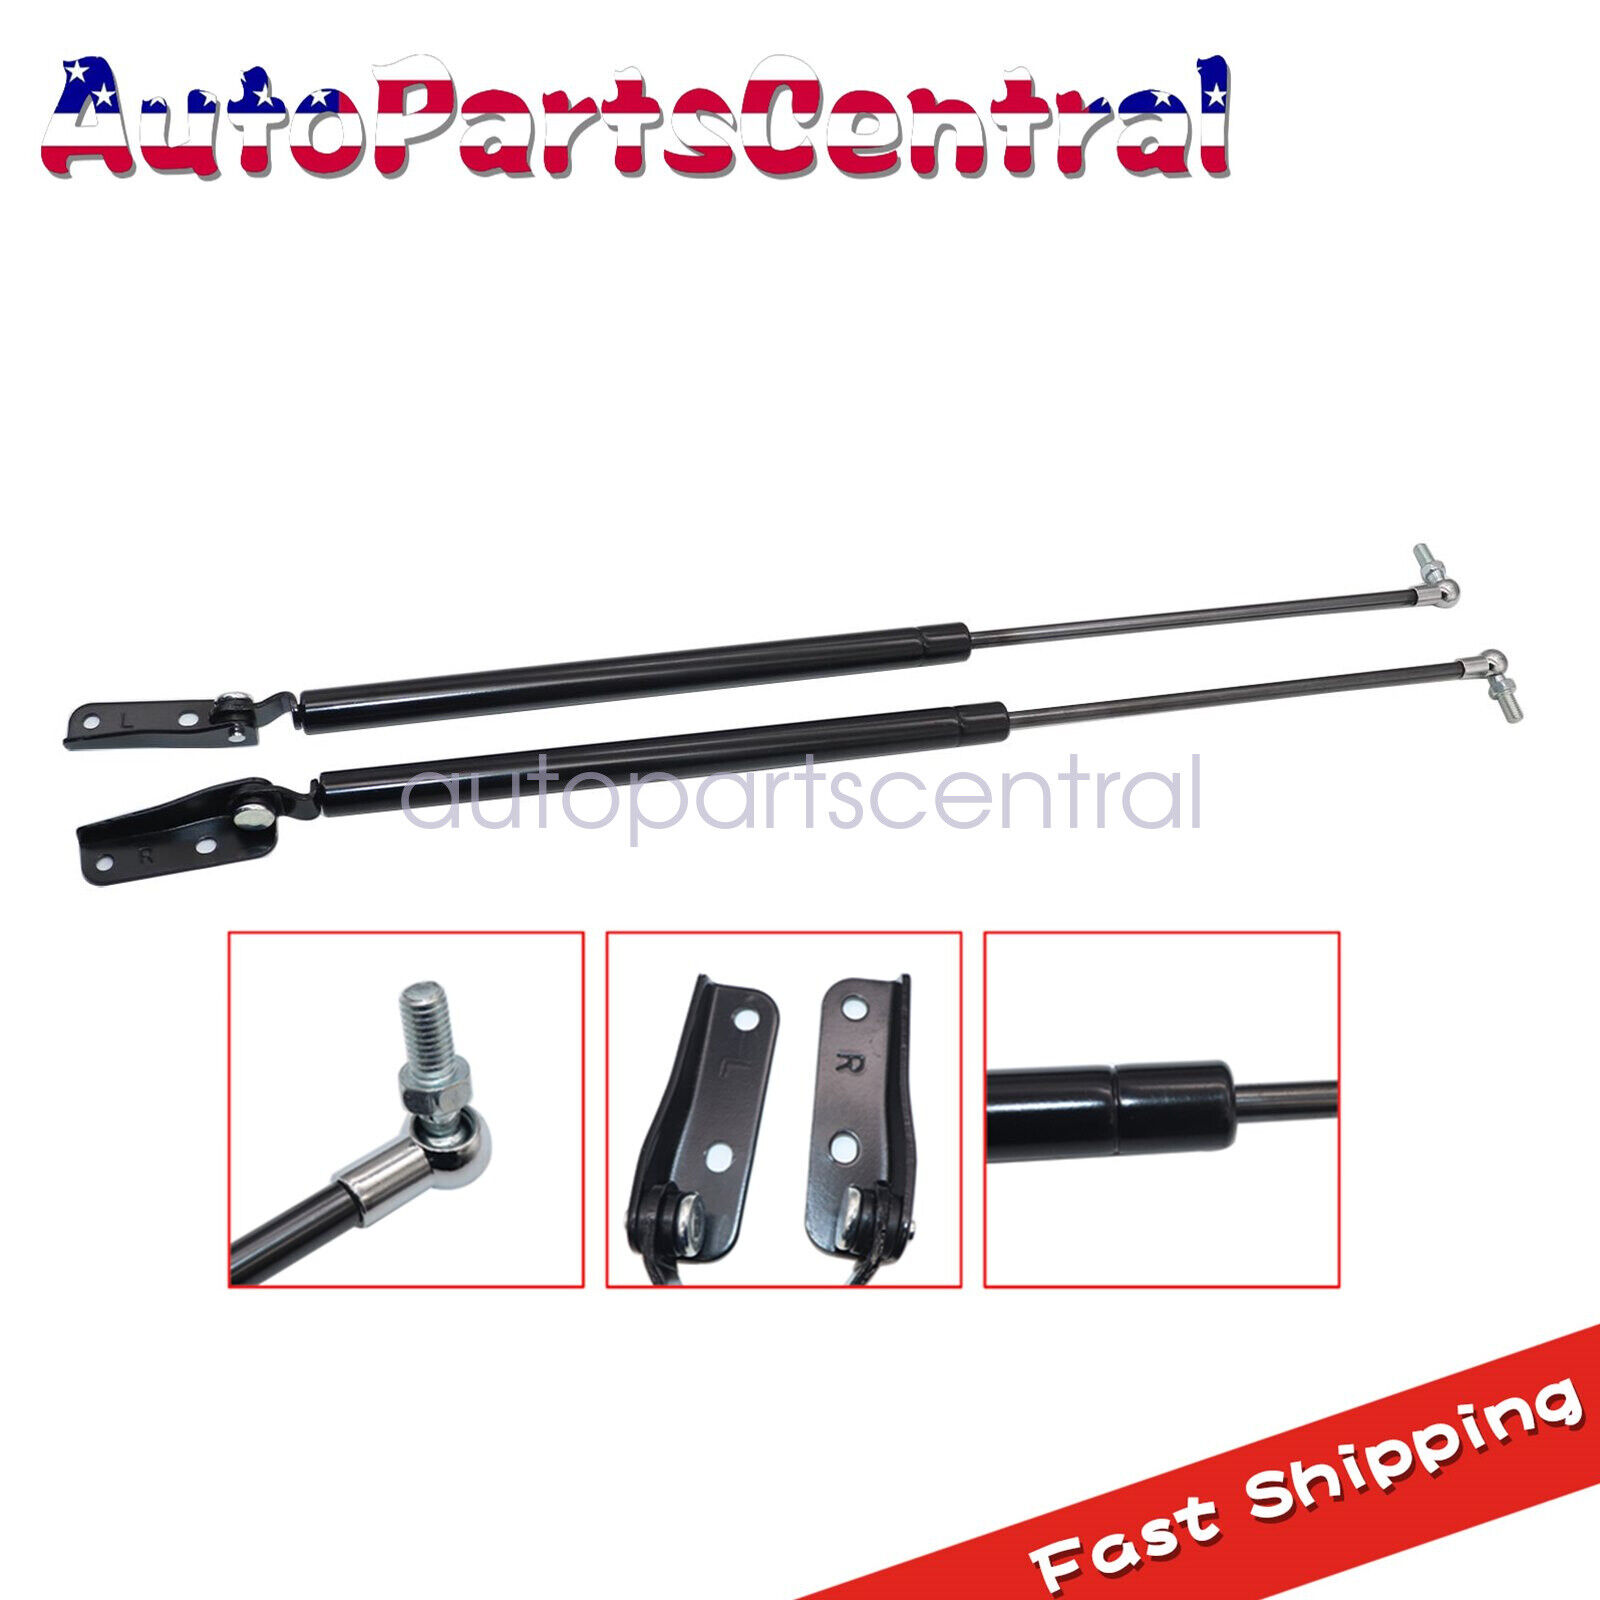 Tailgate Lift Supports Rear Hatch Struts for 2010-2014 Subaru Legacy/Outback